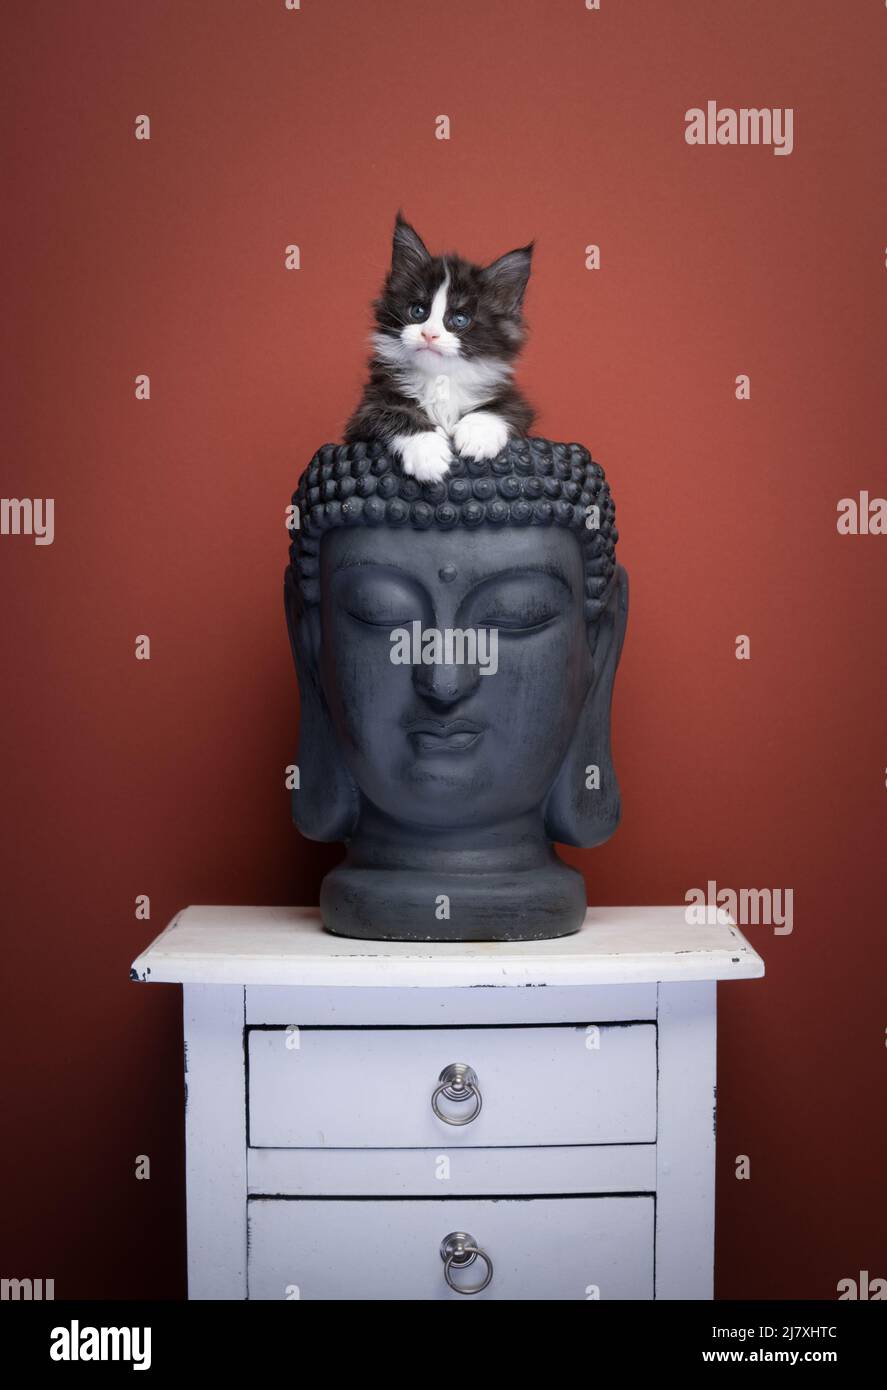 cute tuxedo maine coon kitten inside of empty buddha head plant pot on red brown background Stock Photo